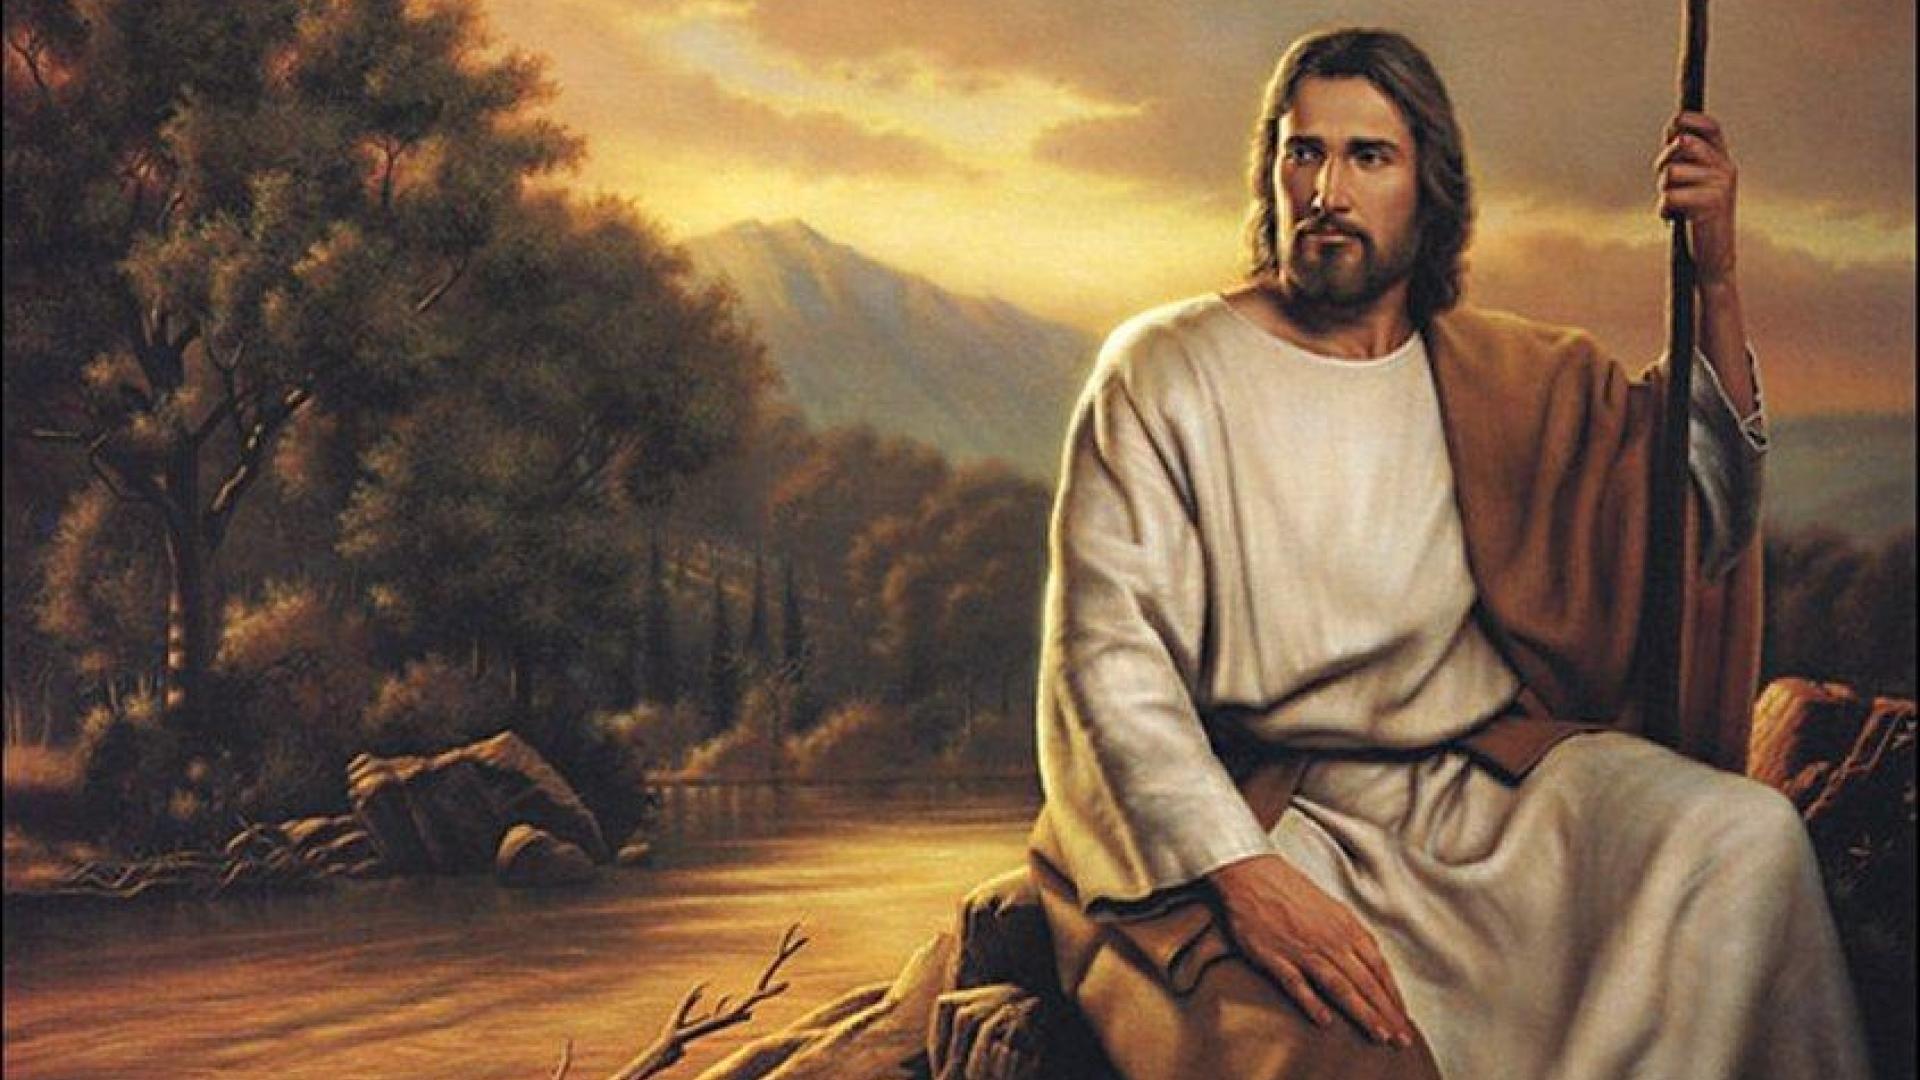 Jesus HD Wallpaper, Jesus Picture For Background, New